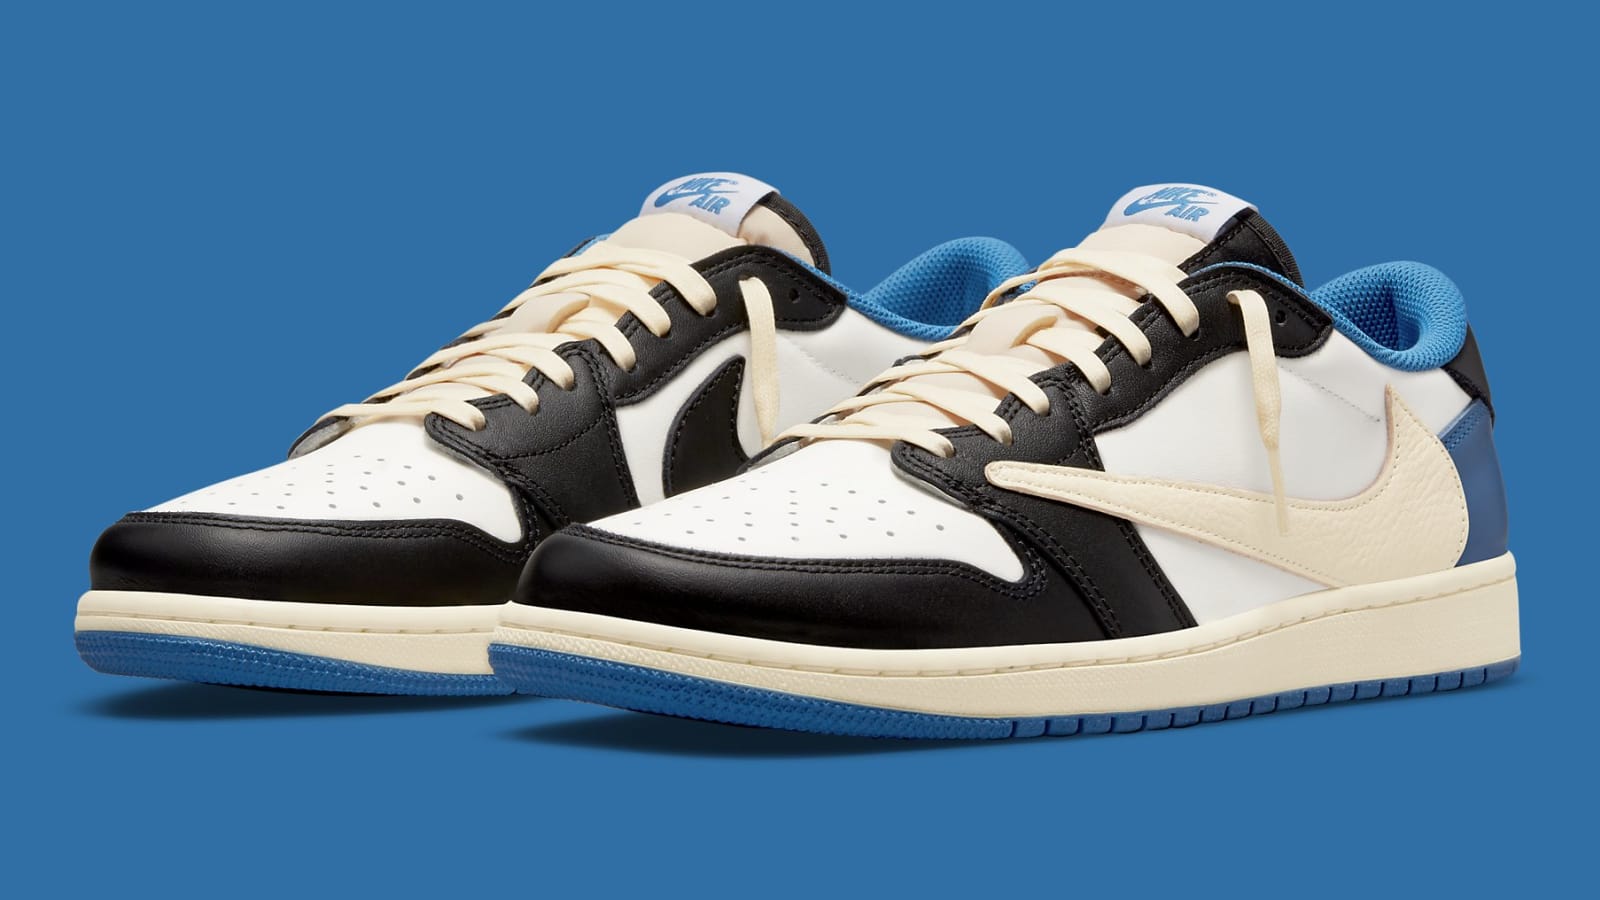 Travis Scott's Fragment AJ1 Low Attracted Over 3 Million Bot Entries